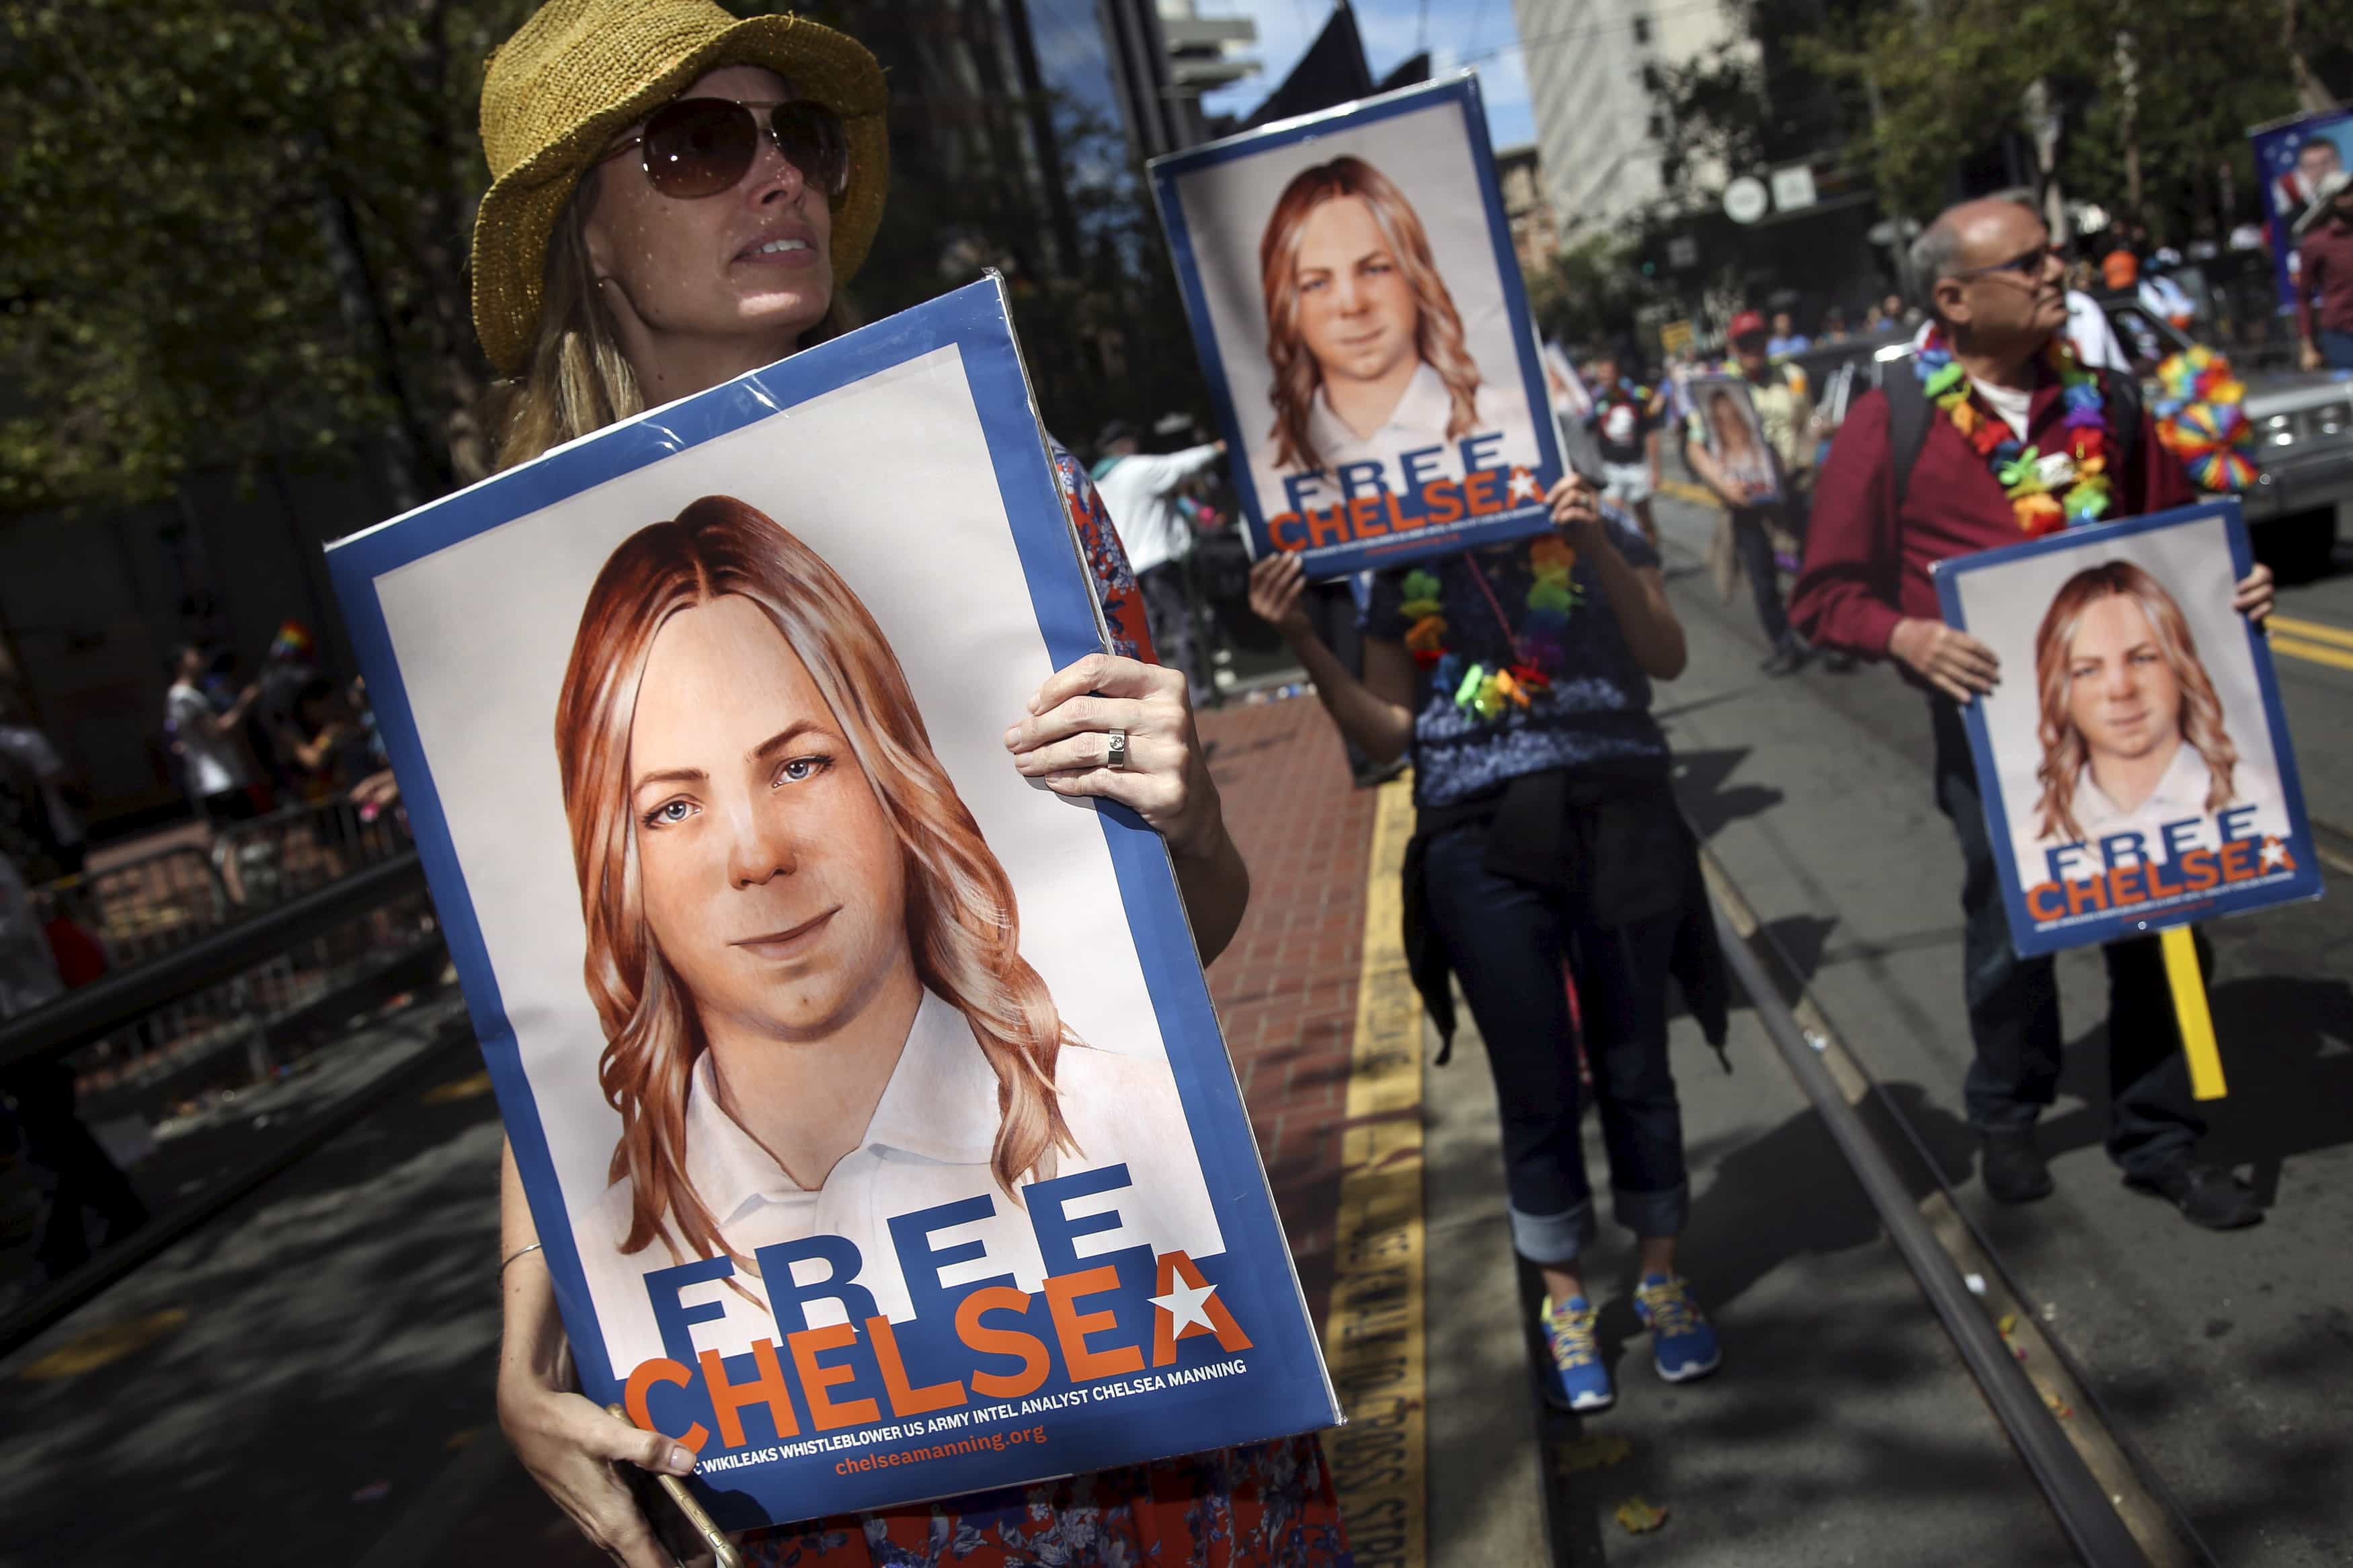 People call for the release of whistleblower Chelsea Manning in San Francisco, California in June 2015, REUTERS/Elijah Nouvelage/File Photo